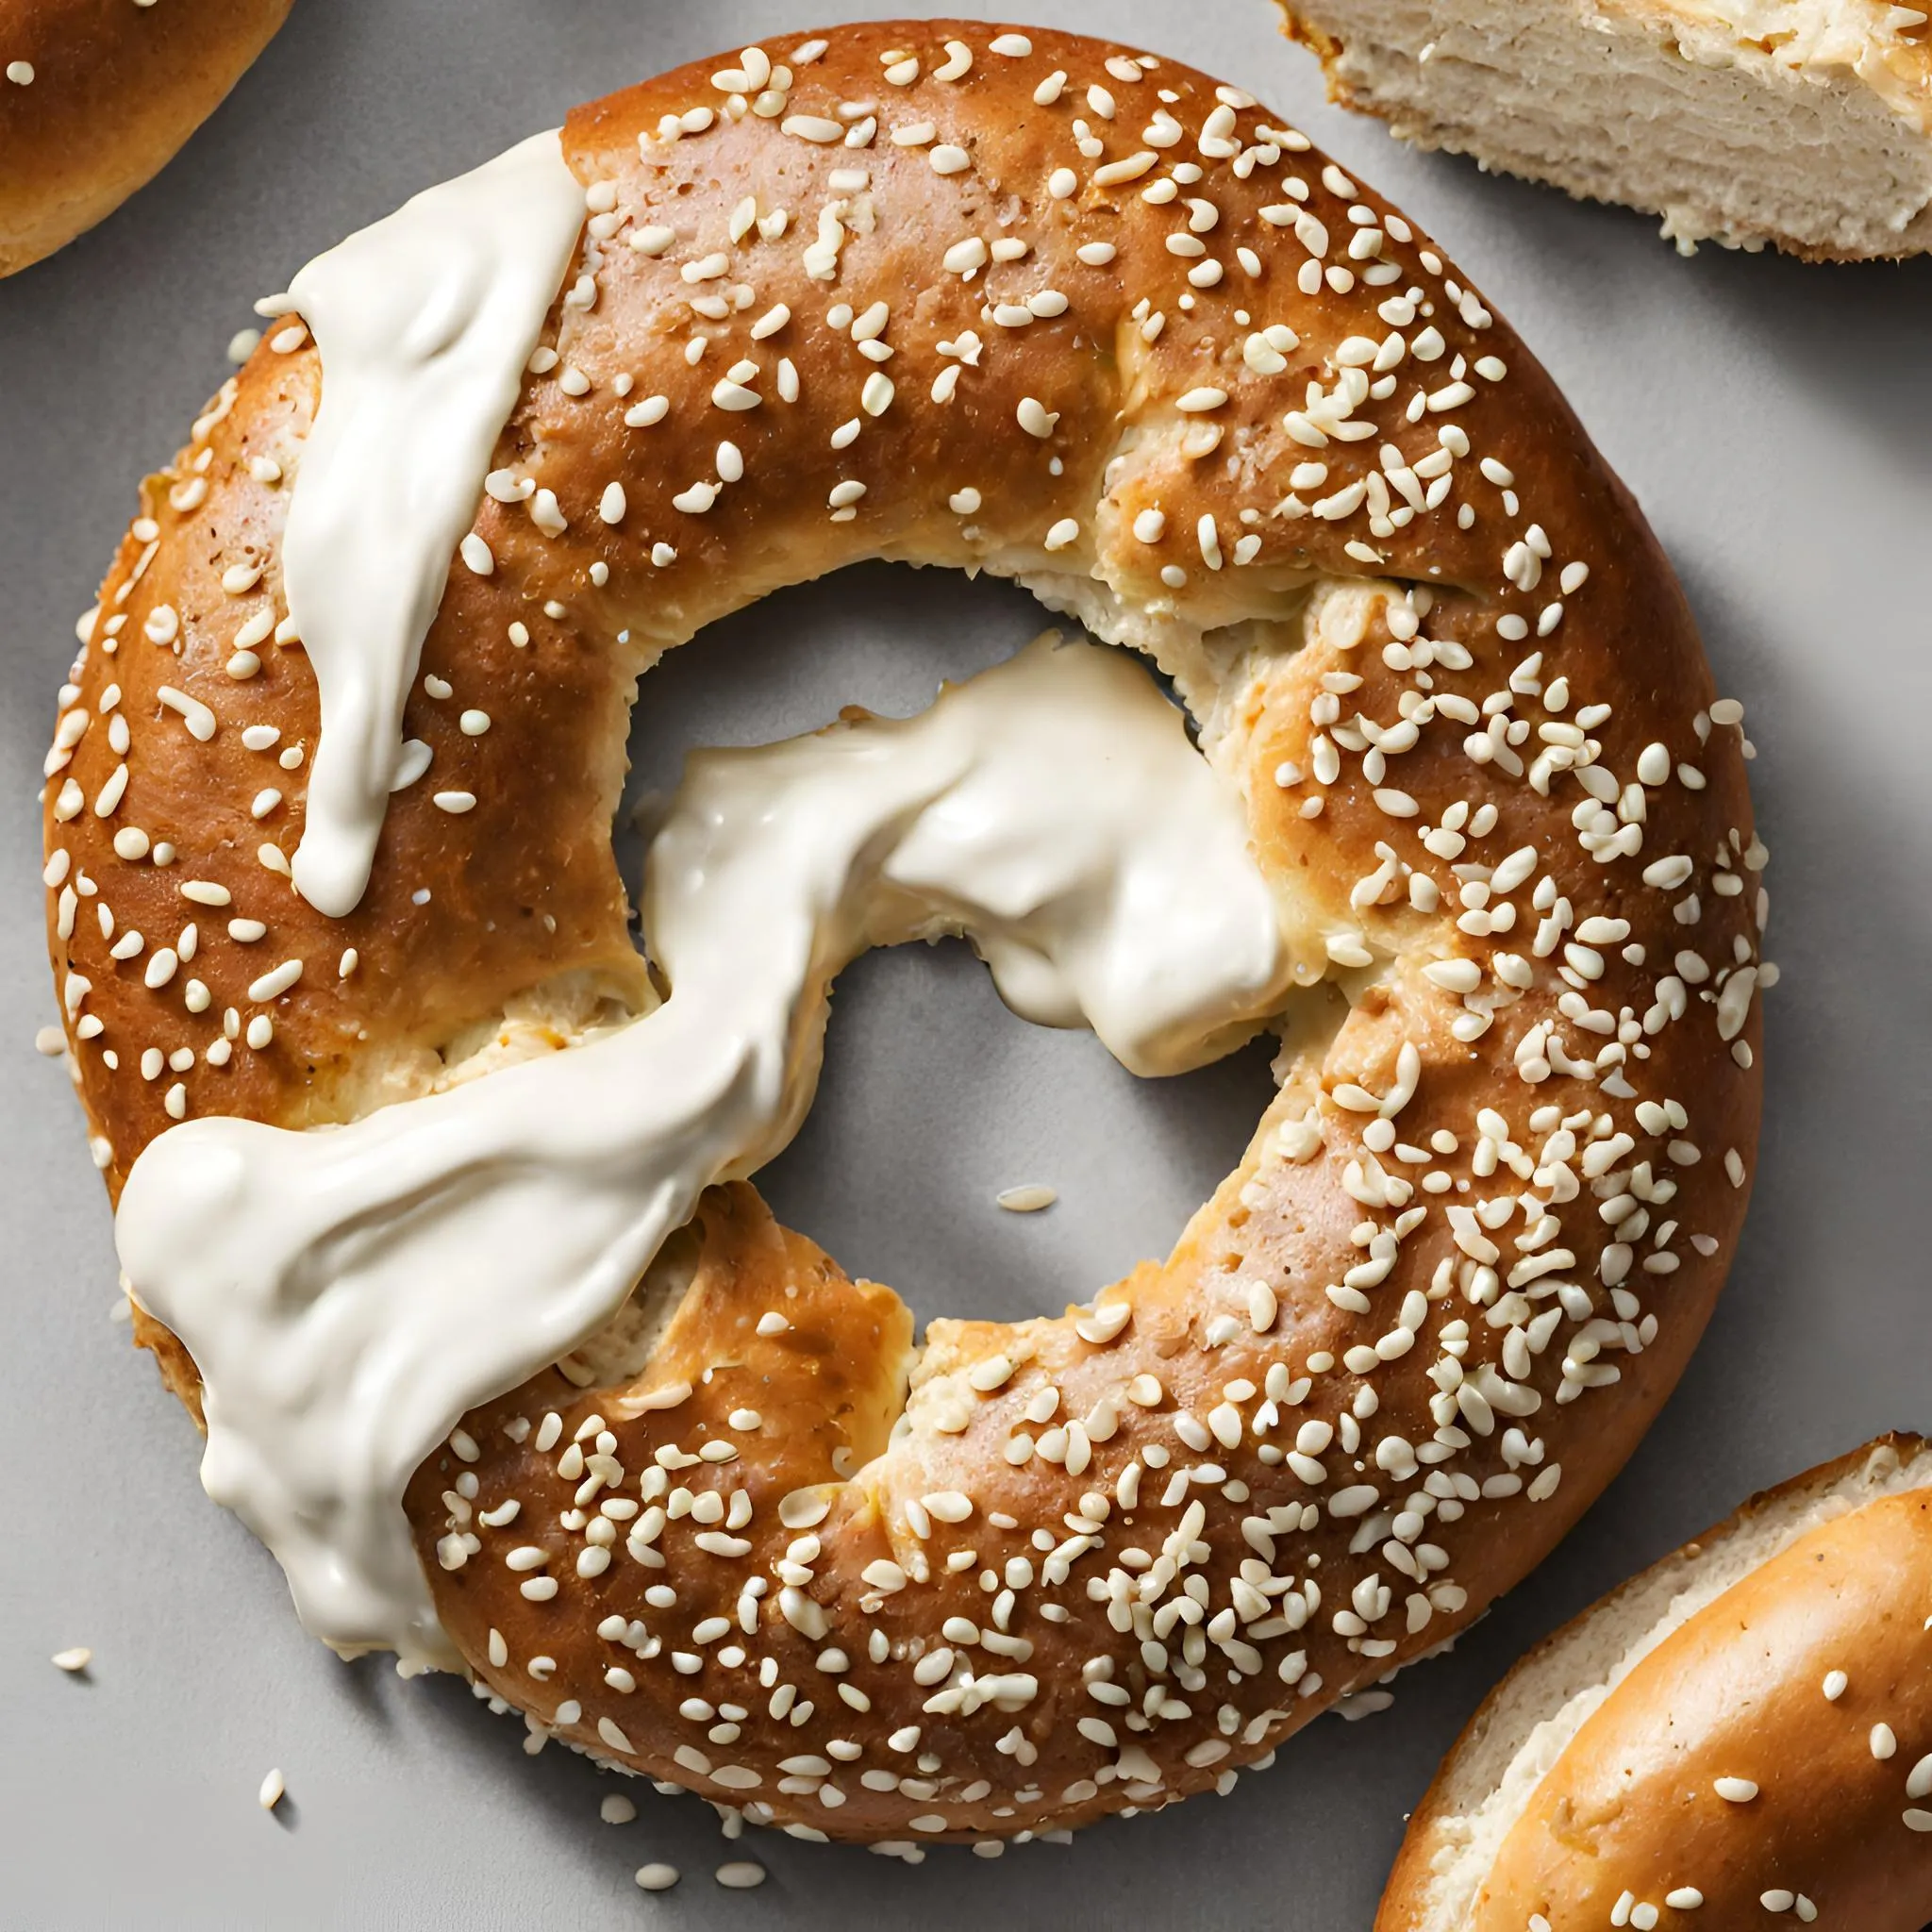 A bagel with sesame seeds and cream cheese on a white plate.